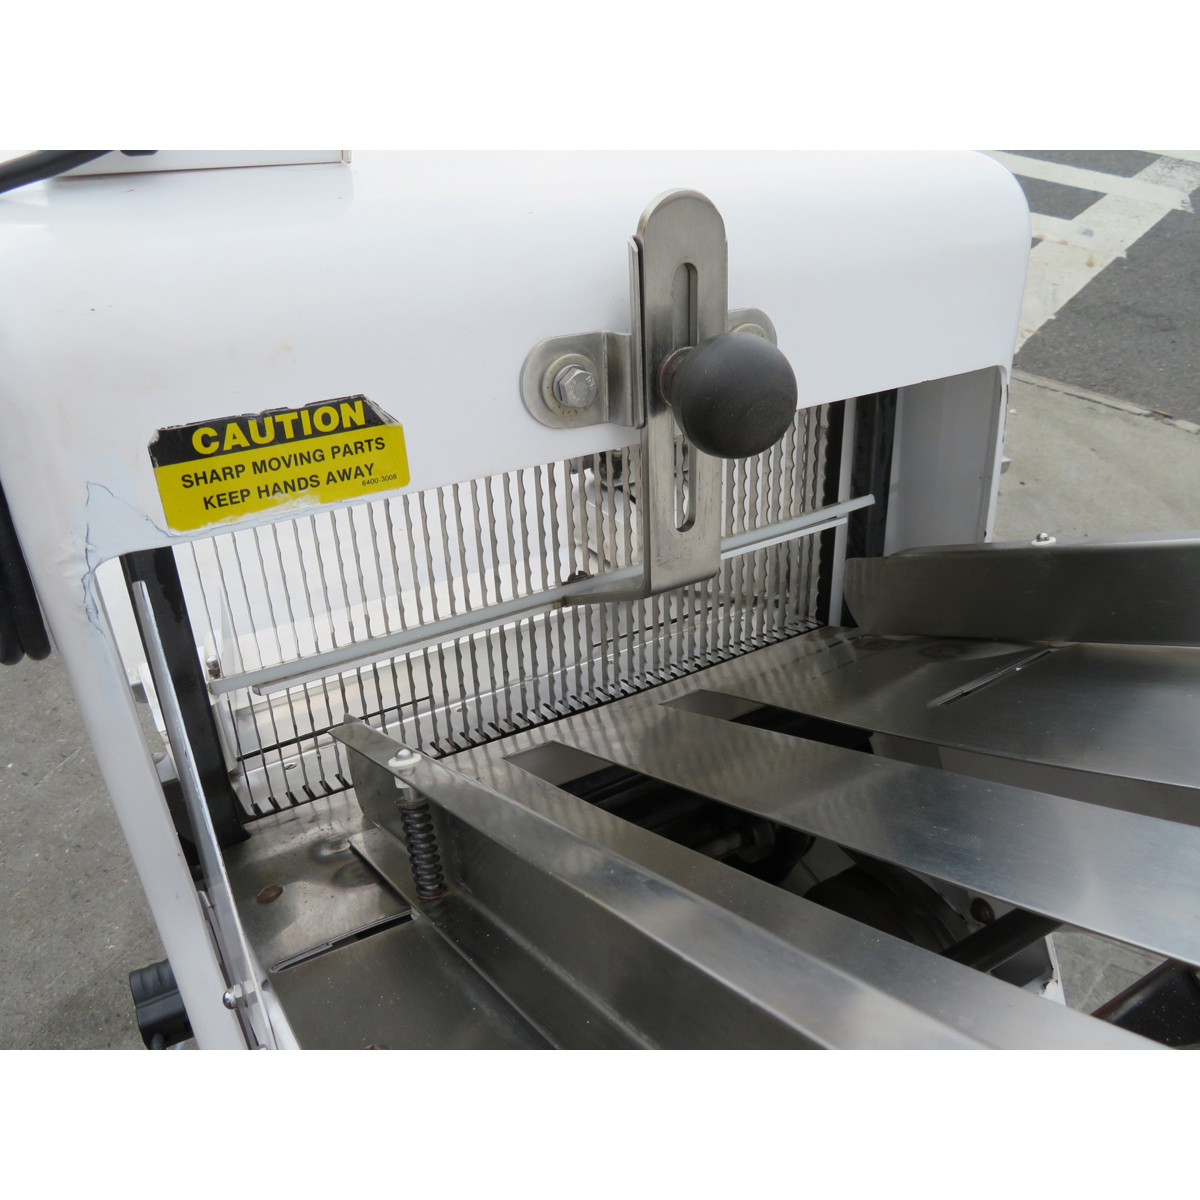 Oliver 797-32 Gravity Feed Bread Slicer 3/8" Cut w/Swing-Away Bagger 1197, Used Excellent Condition image 5